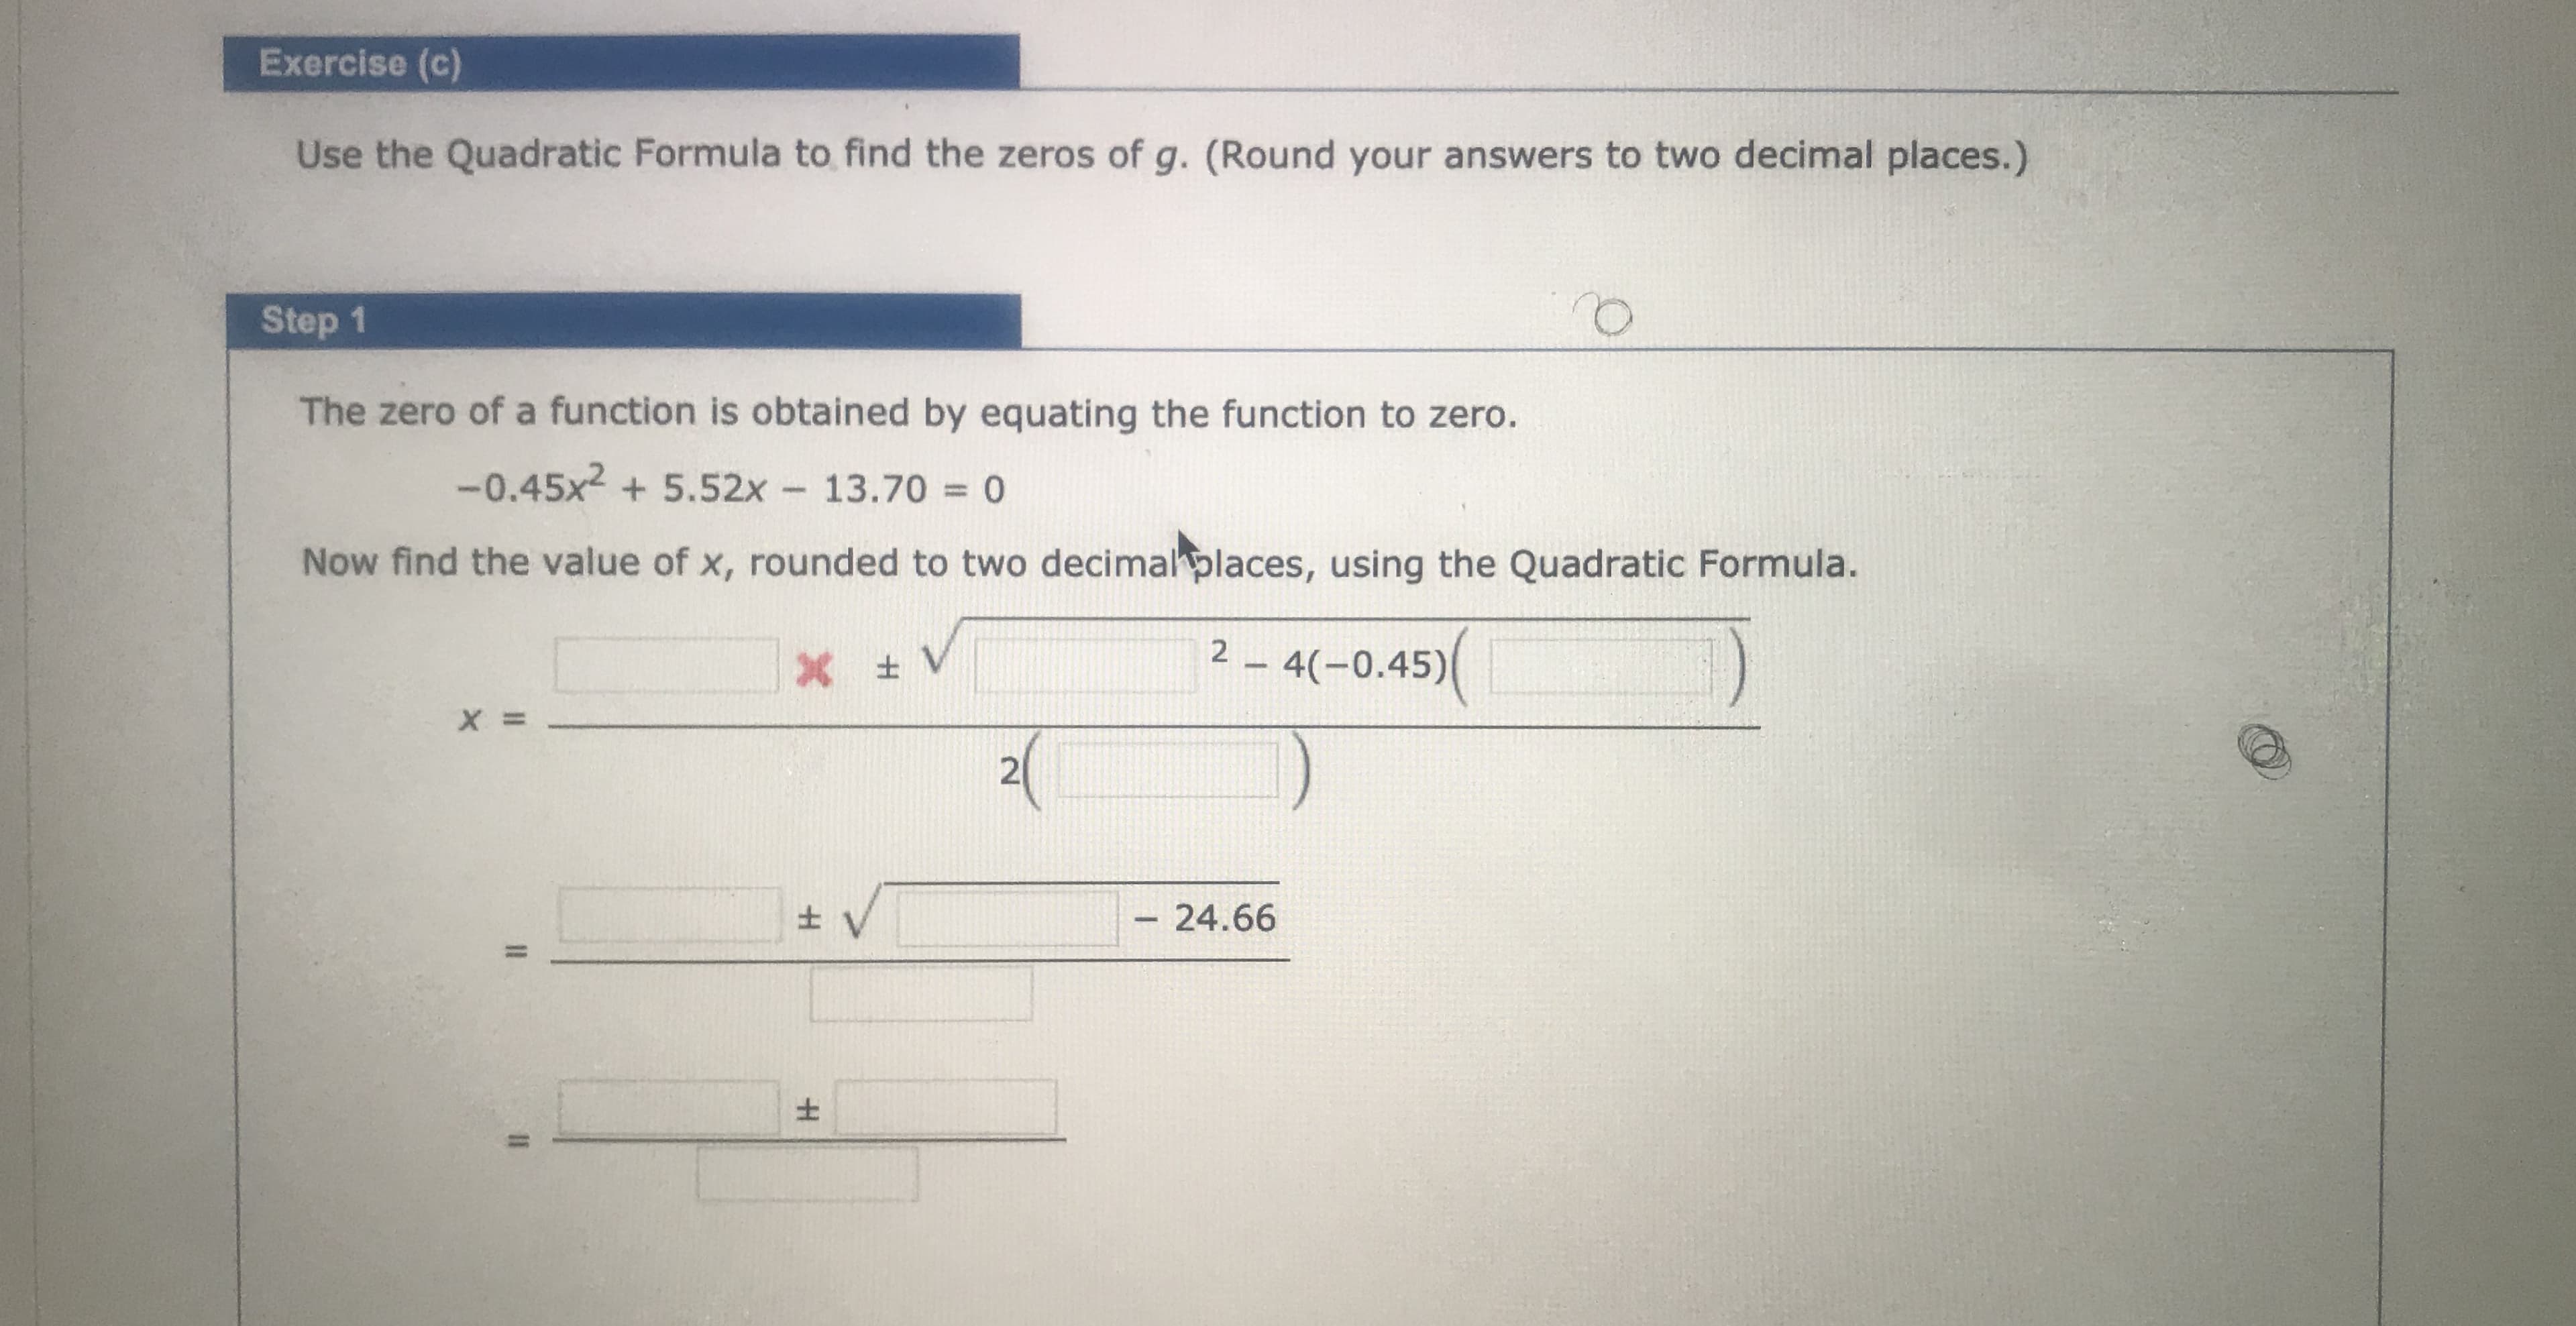 Exercise (c)
Use the Quadratic Formula to find the zeros of g. (Round your answers to two decimal places.)
Step 1
The zero of a function is obtained by equating the function to zero.
-0.45x2 + 5.52x
13.70 = 0
Now find the value of x, rounded to two decimal places, using the Quadratic Formula.
2 - 4(-0.45)(
21
- 24.66
